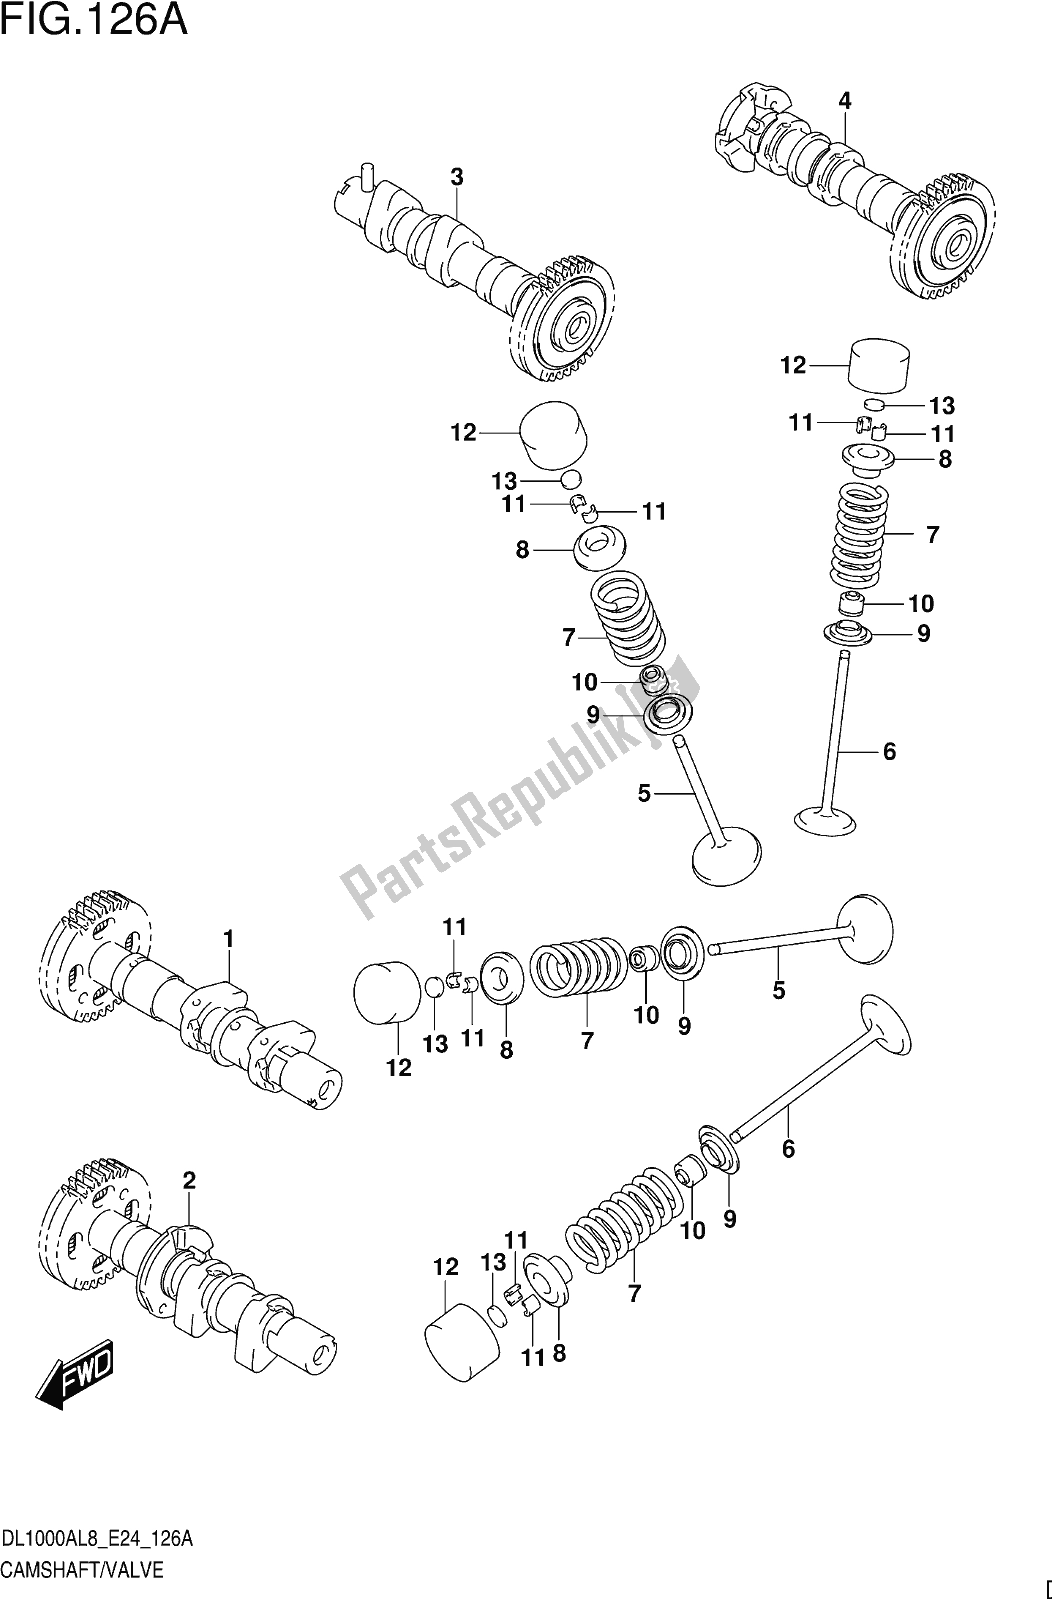 All parts for the Fig. 126a Camshaft/valve of the Suzuki DL 1000 XA 2018